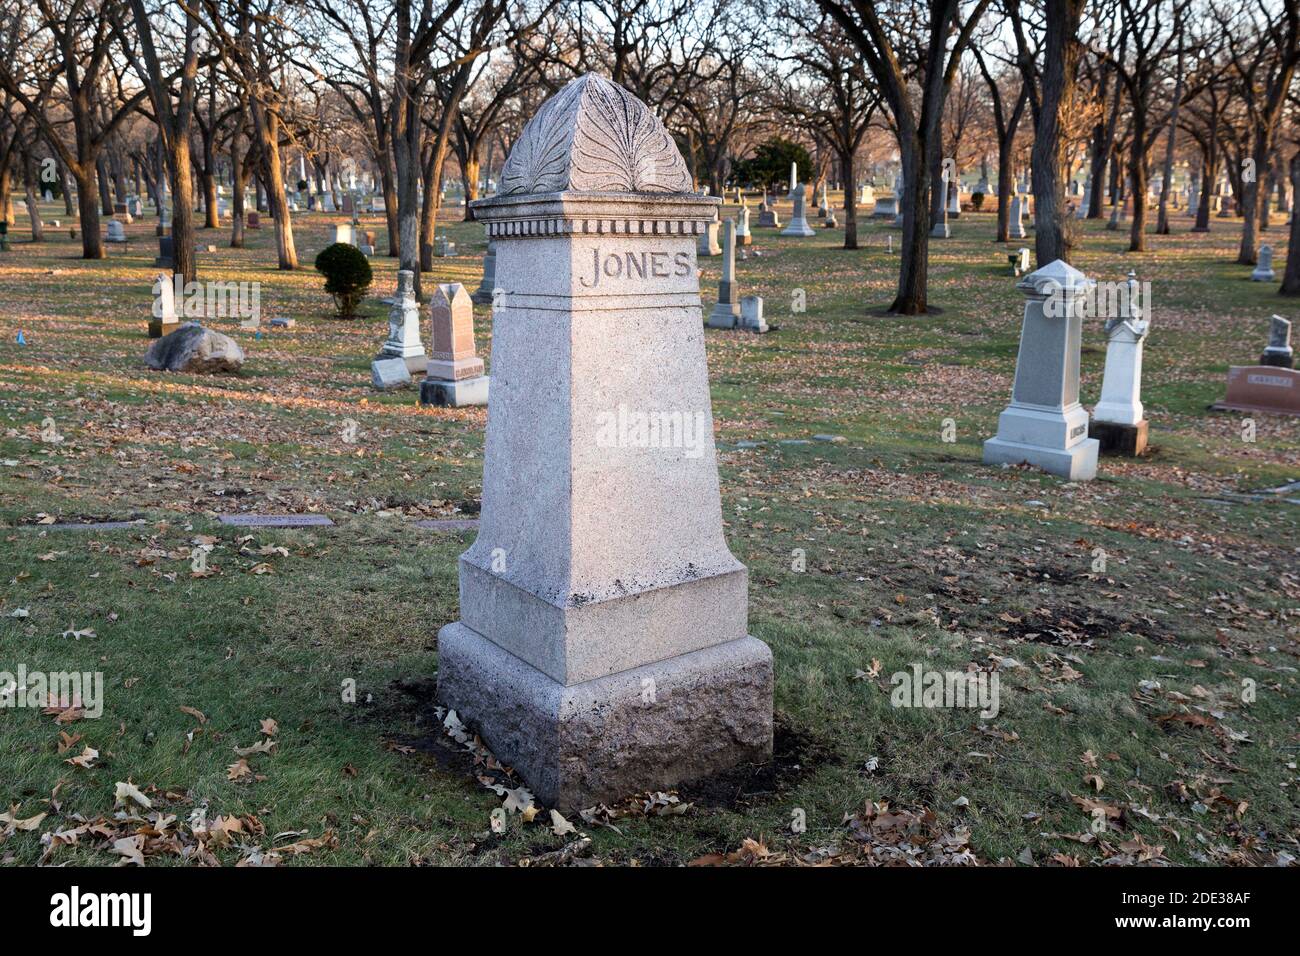 Tombstone for architect Harry Wild Jones monument in the Lakewood Cemetery, Minneapolis, Minnesota.  The monument has an architectural cornice, dentil Stock Photo